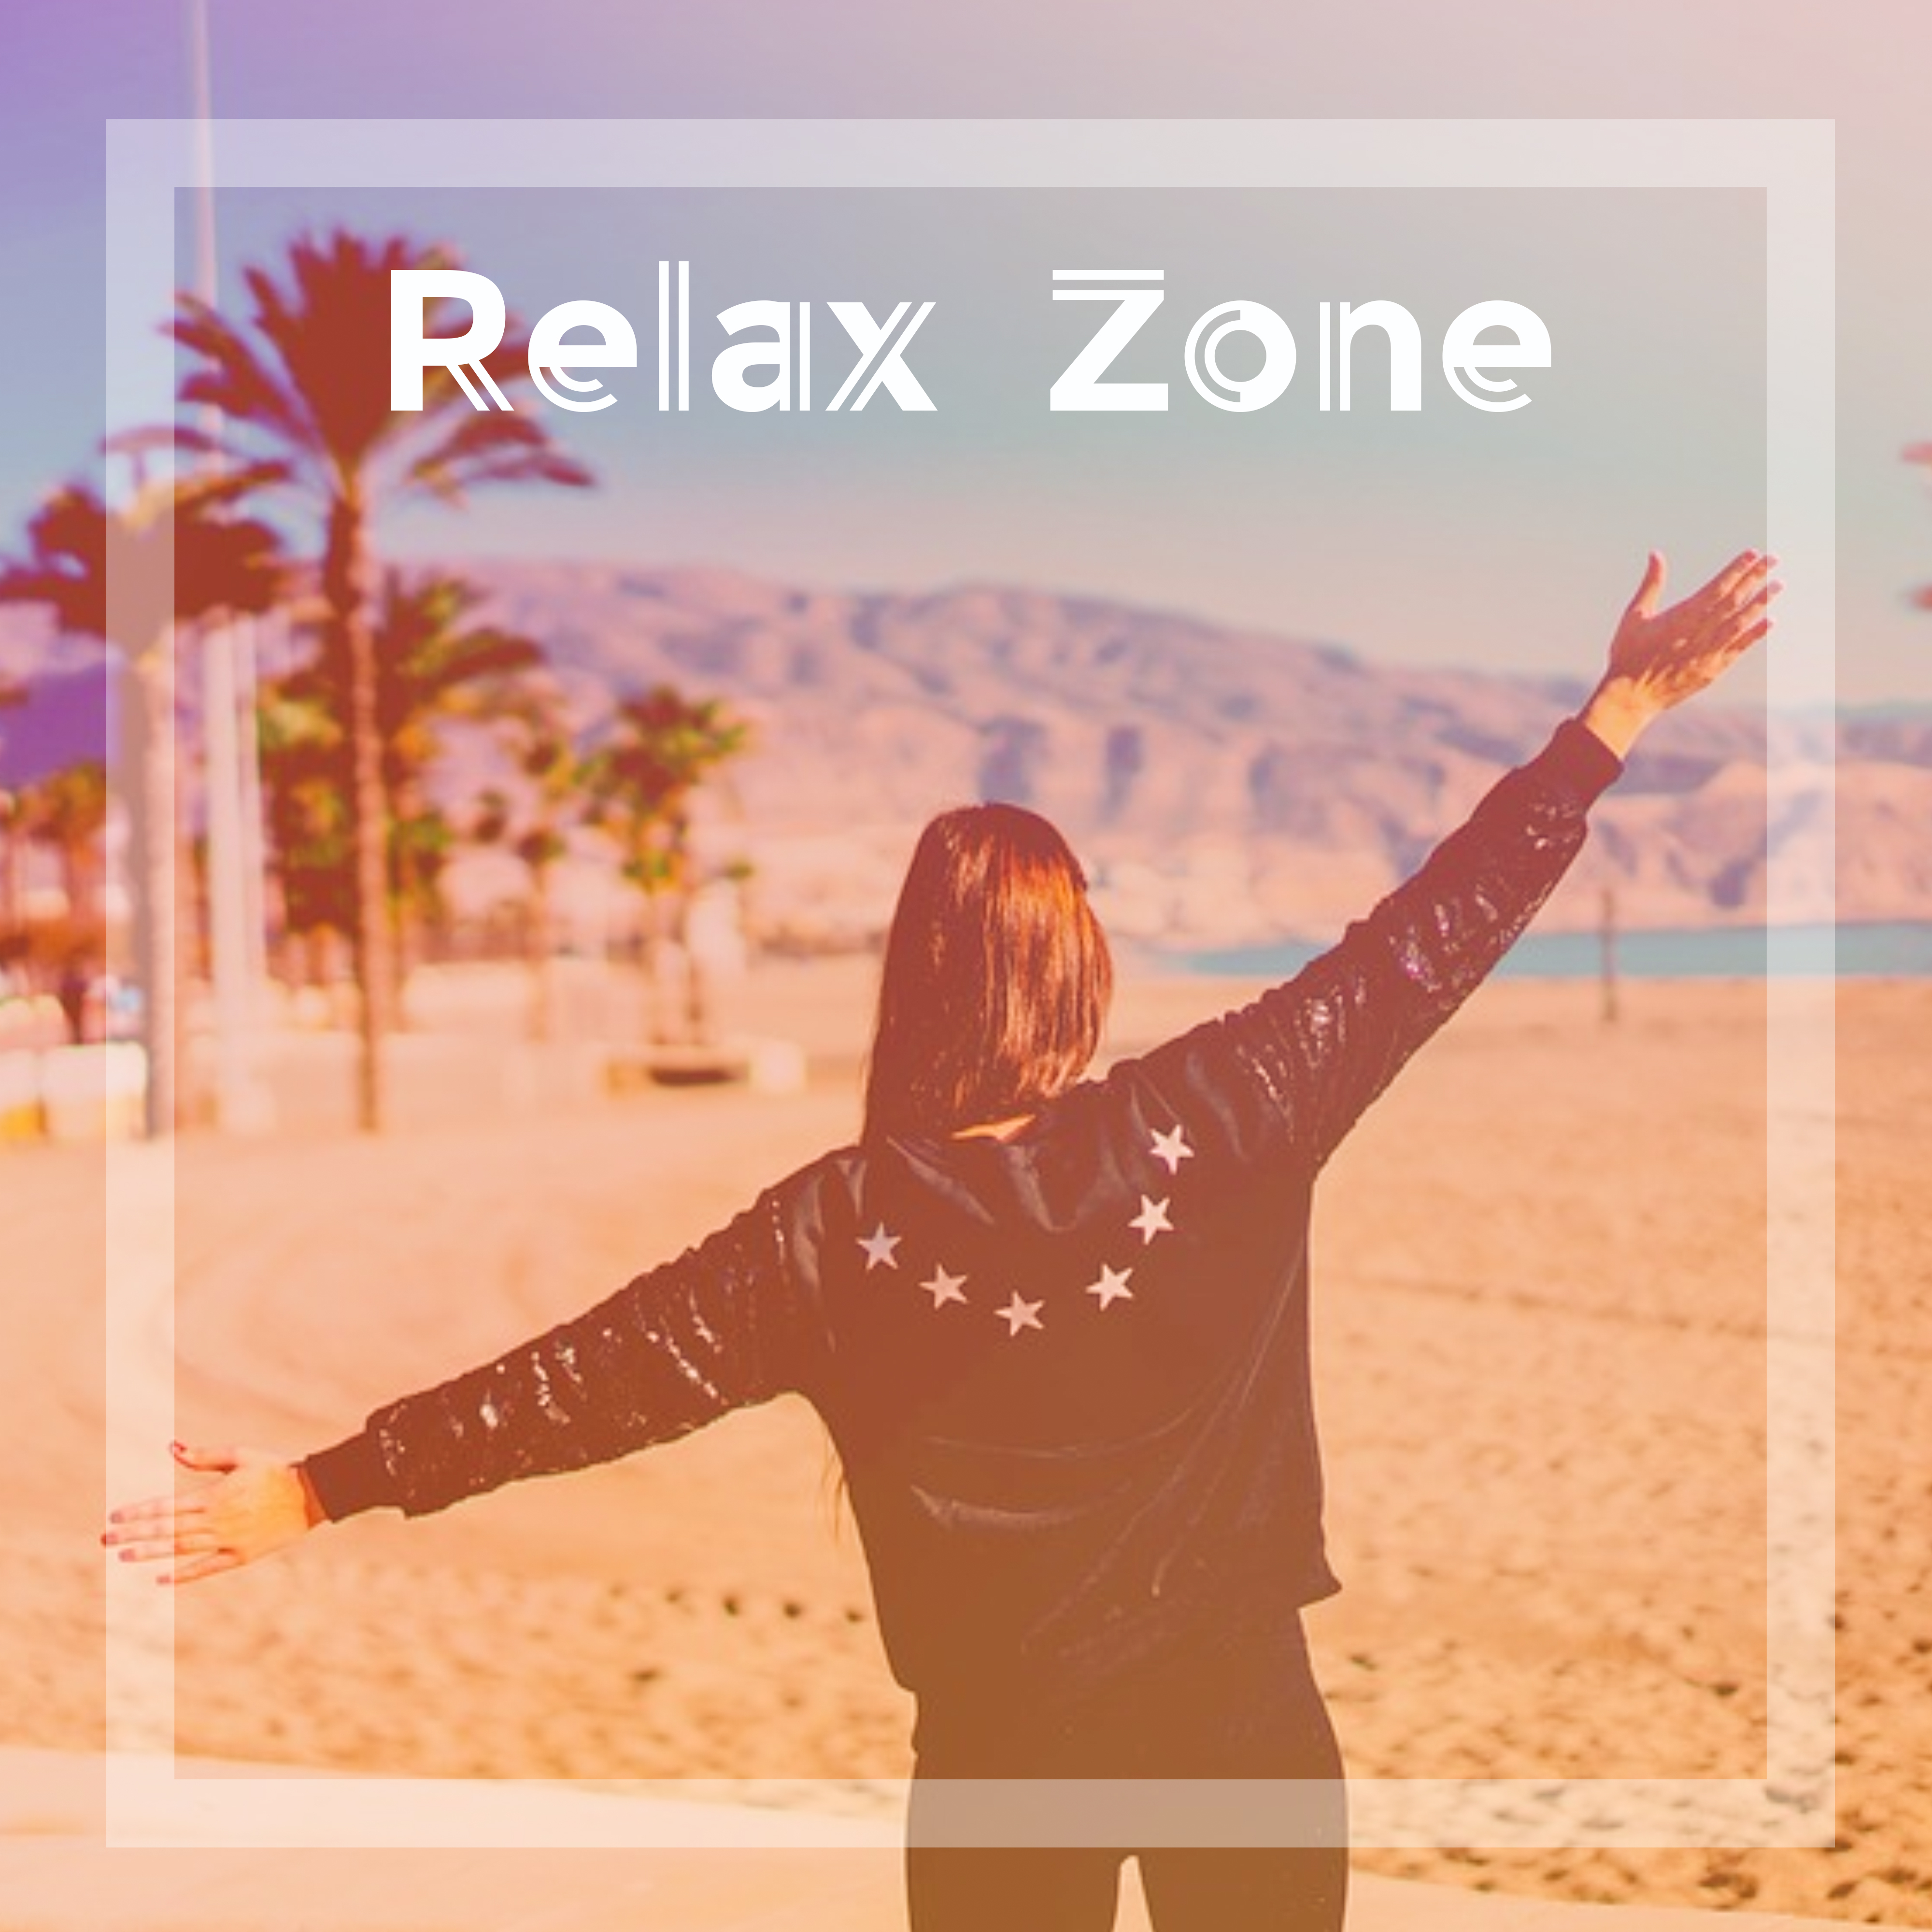 Relax Zone - Deep Chill Out Bounce, **** Lounge, Chillout on the Beach, Chilled Holidays, Chill Out Music, Total Relaxation